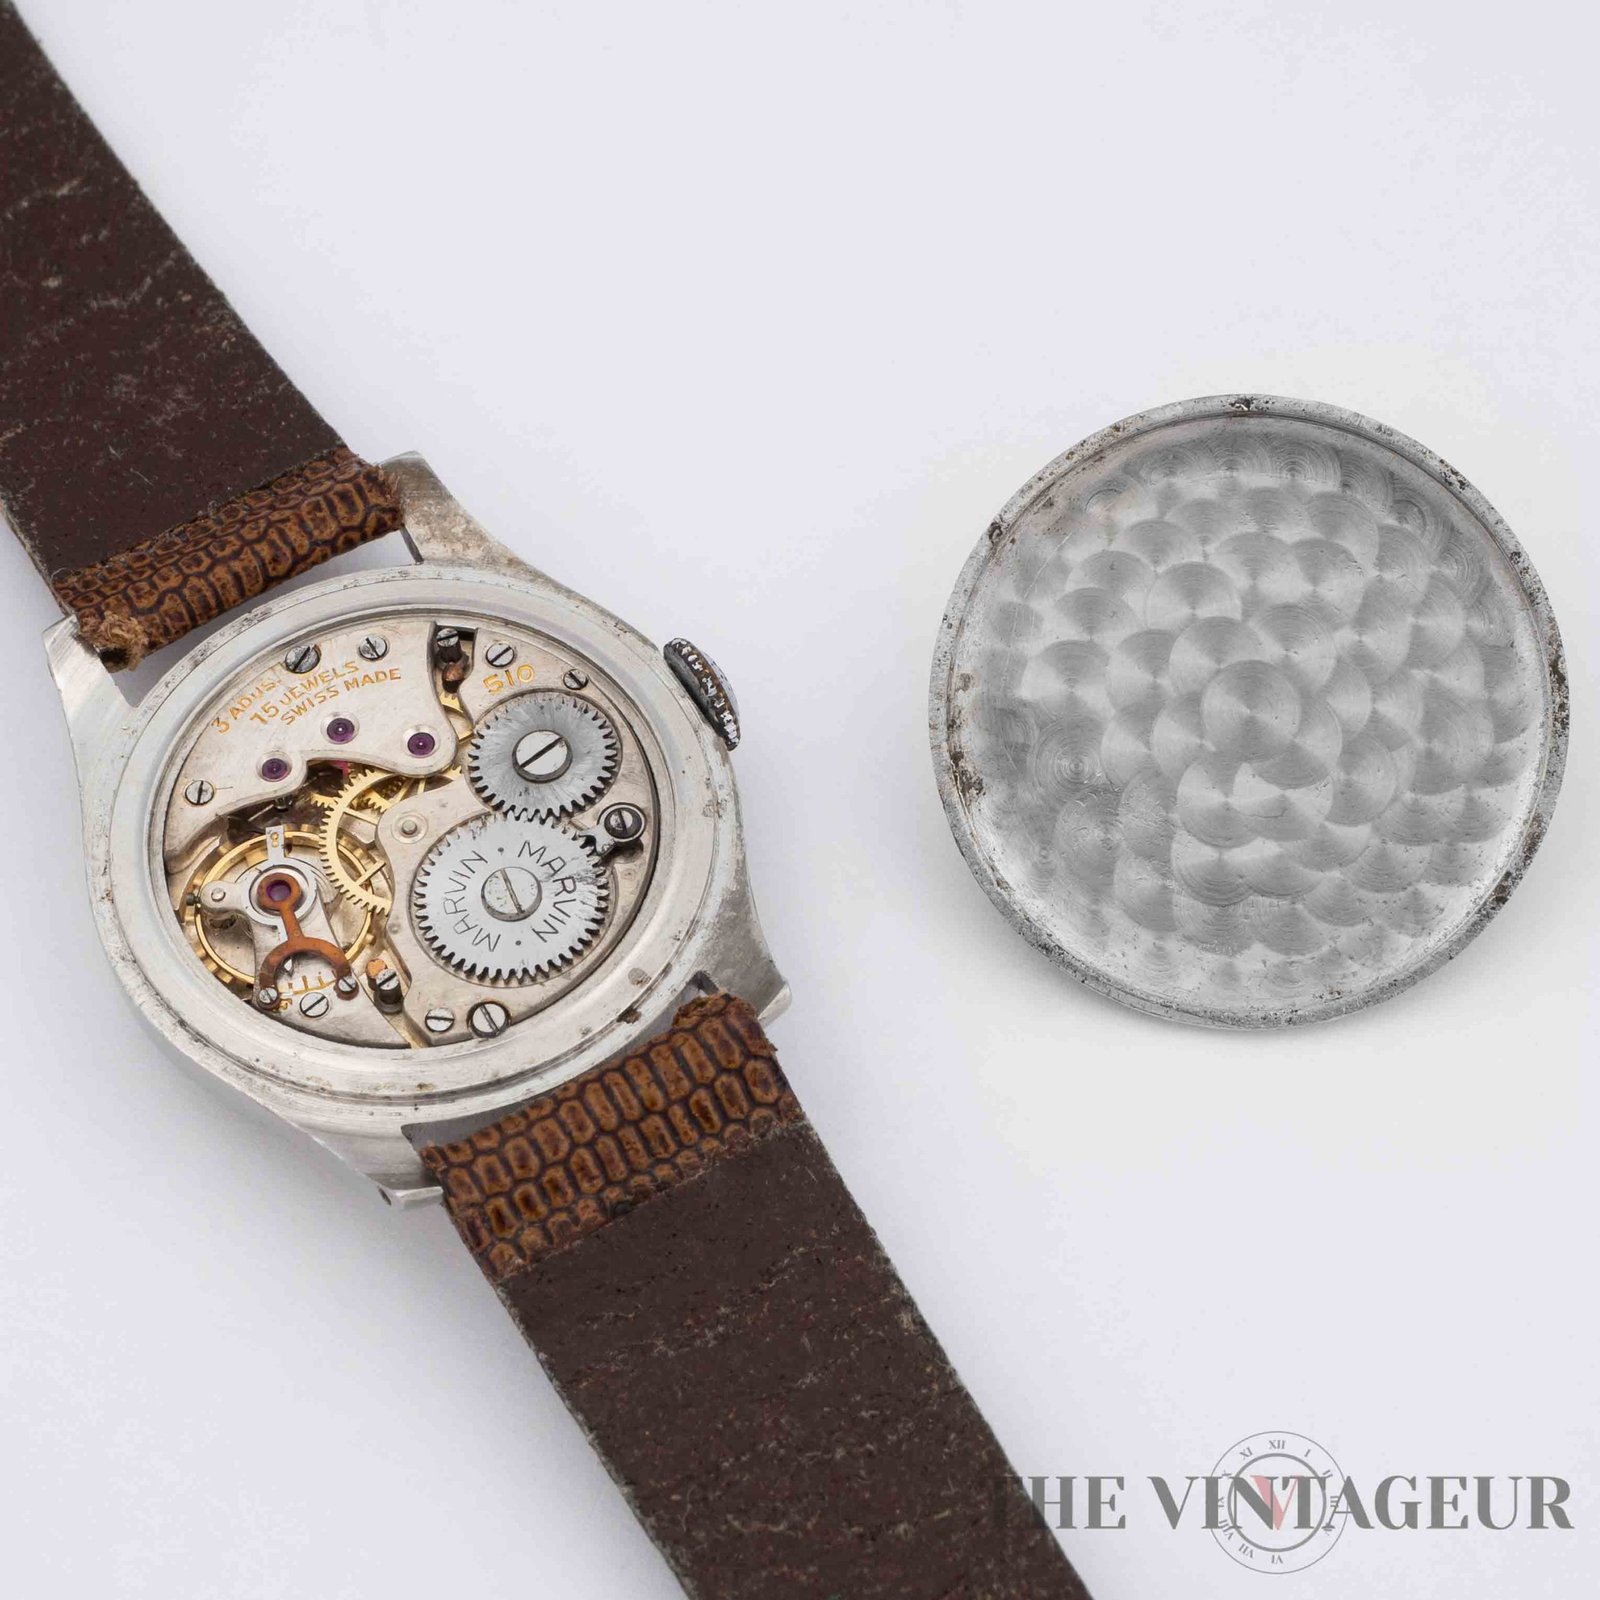 Marvin - Decò - The Vintageur - Your bespoke watches collection - Collectible watches and more